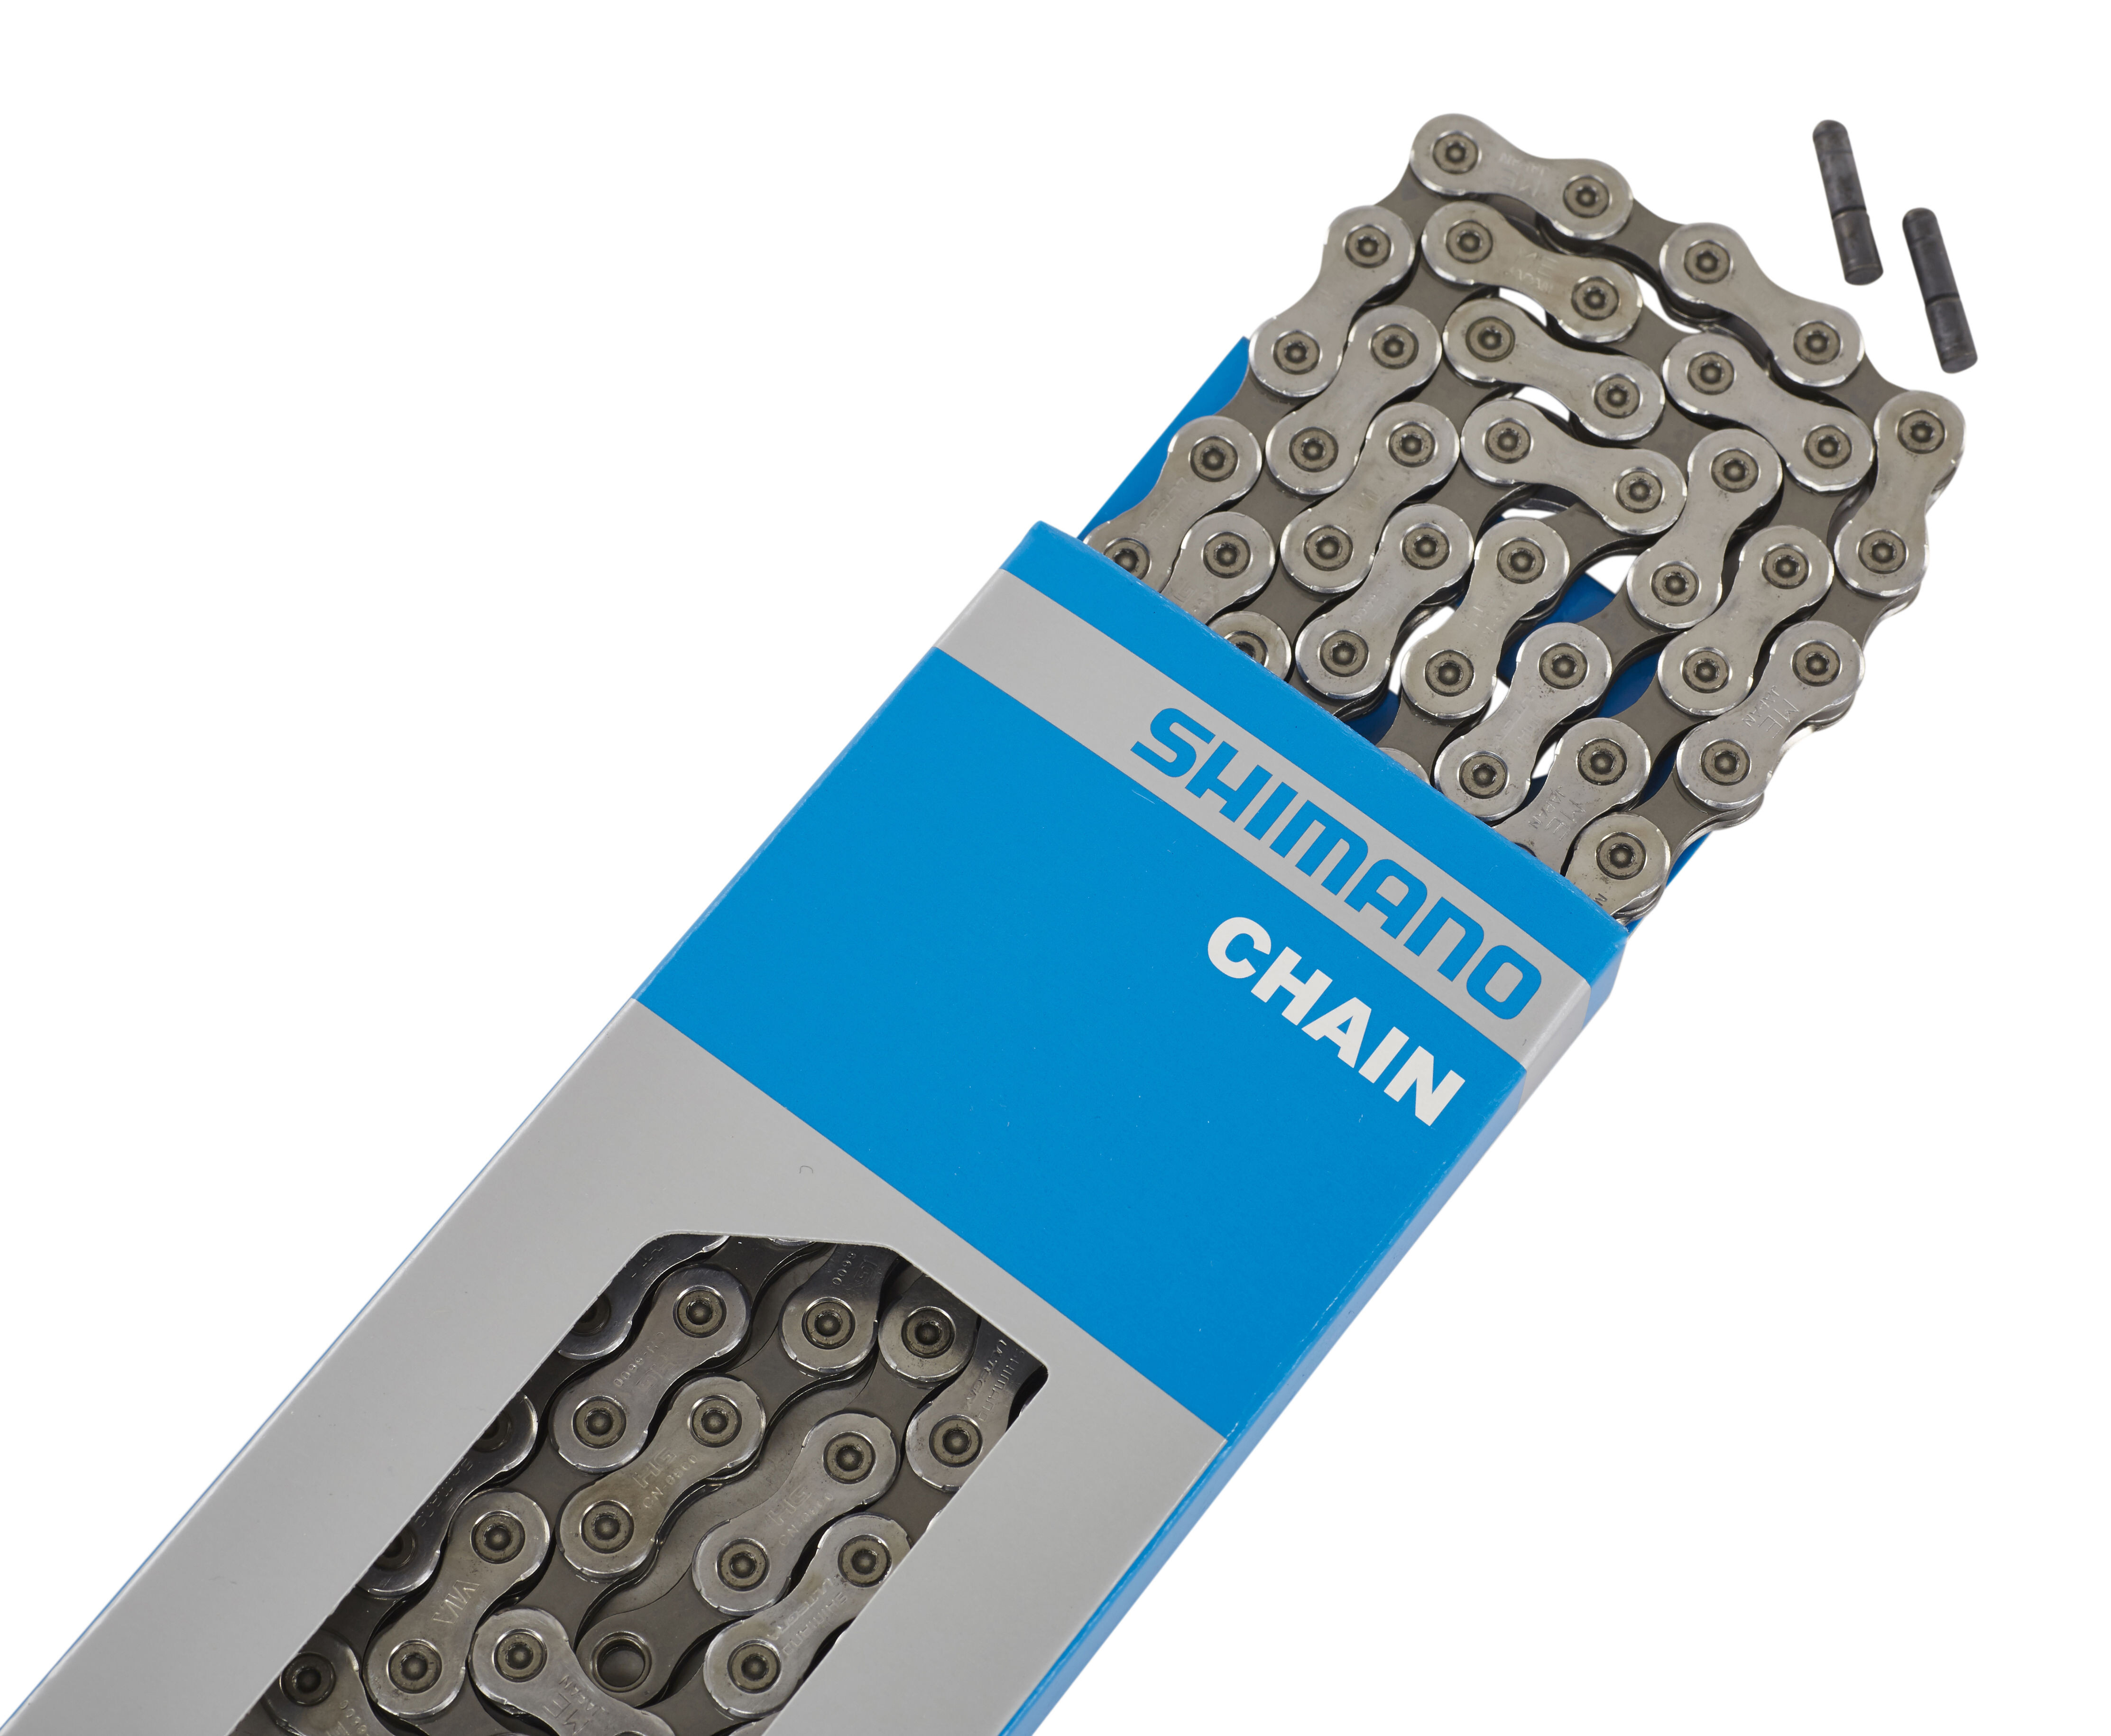 Shimano CN-6600 10-Speed 116L Ultegra//Dura-Ace Hyperglide Road Bicycle Chain